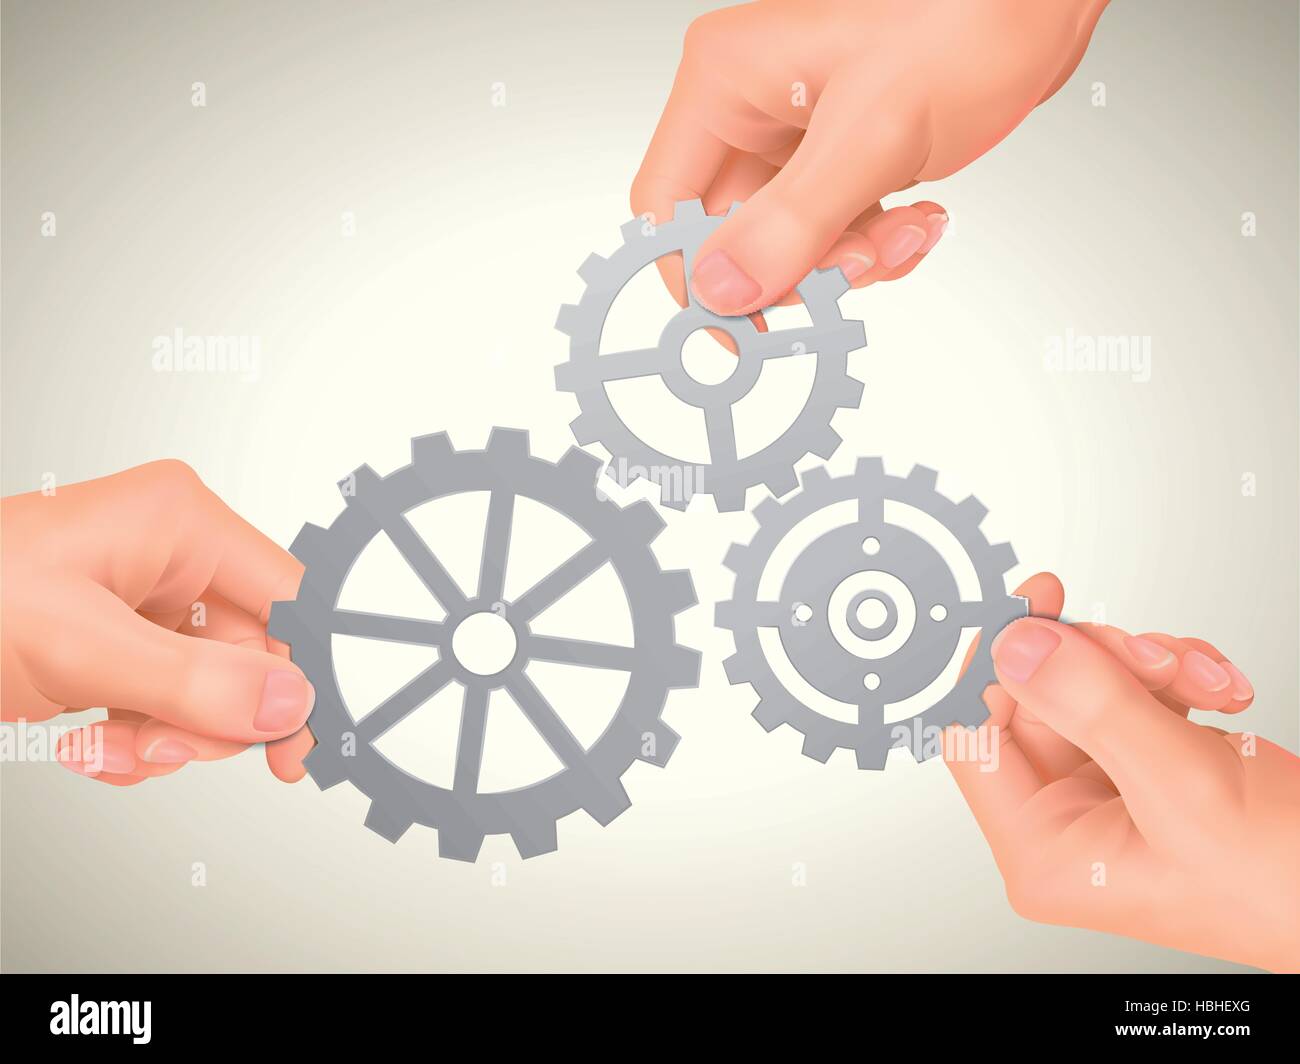 cooperation concept: hands holding gears over beige background Stock Vector